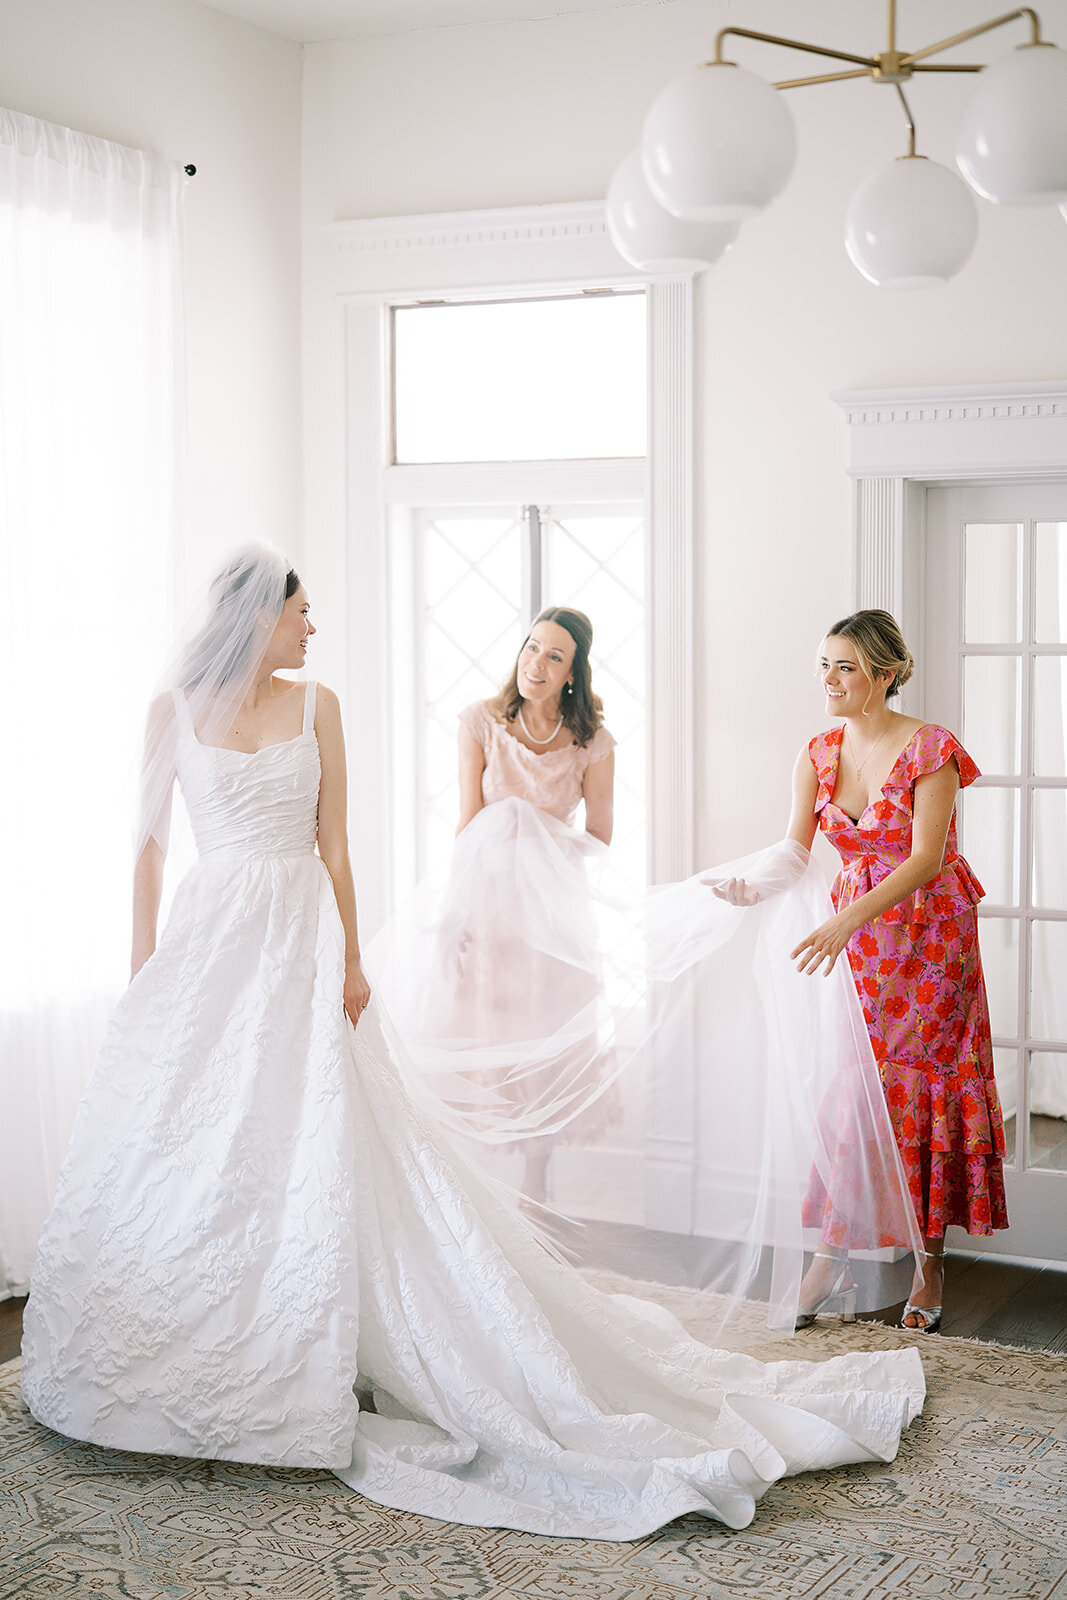 The bride's mother and sister help her with her veil in the brightly lit bridal suite